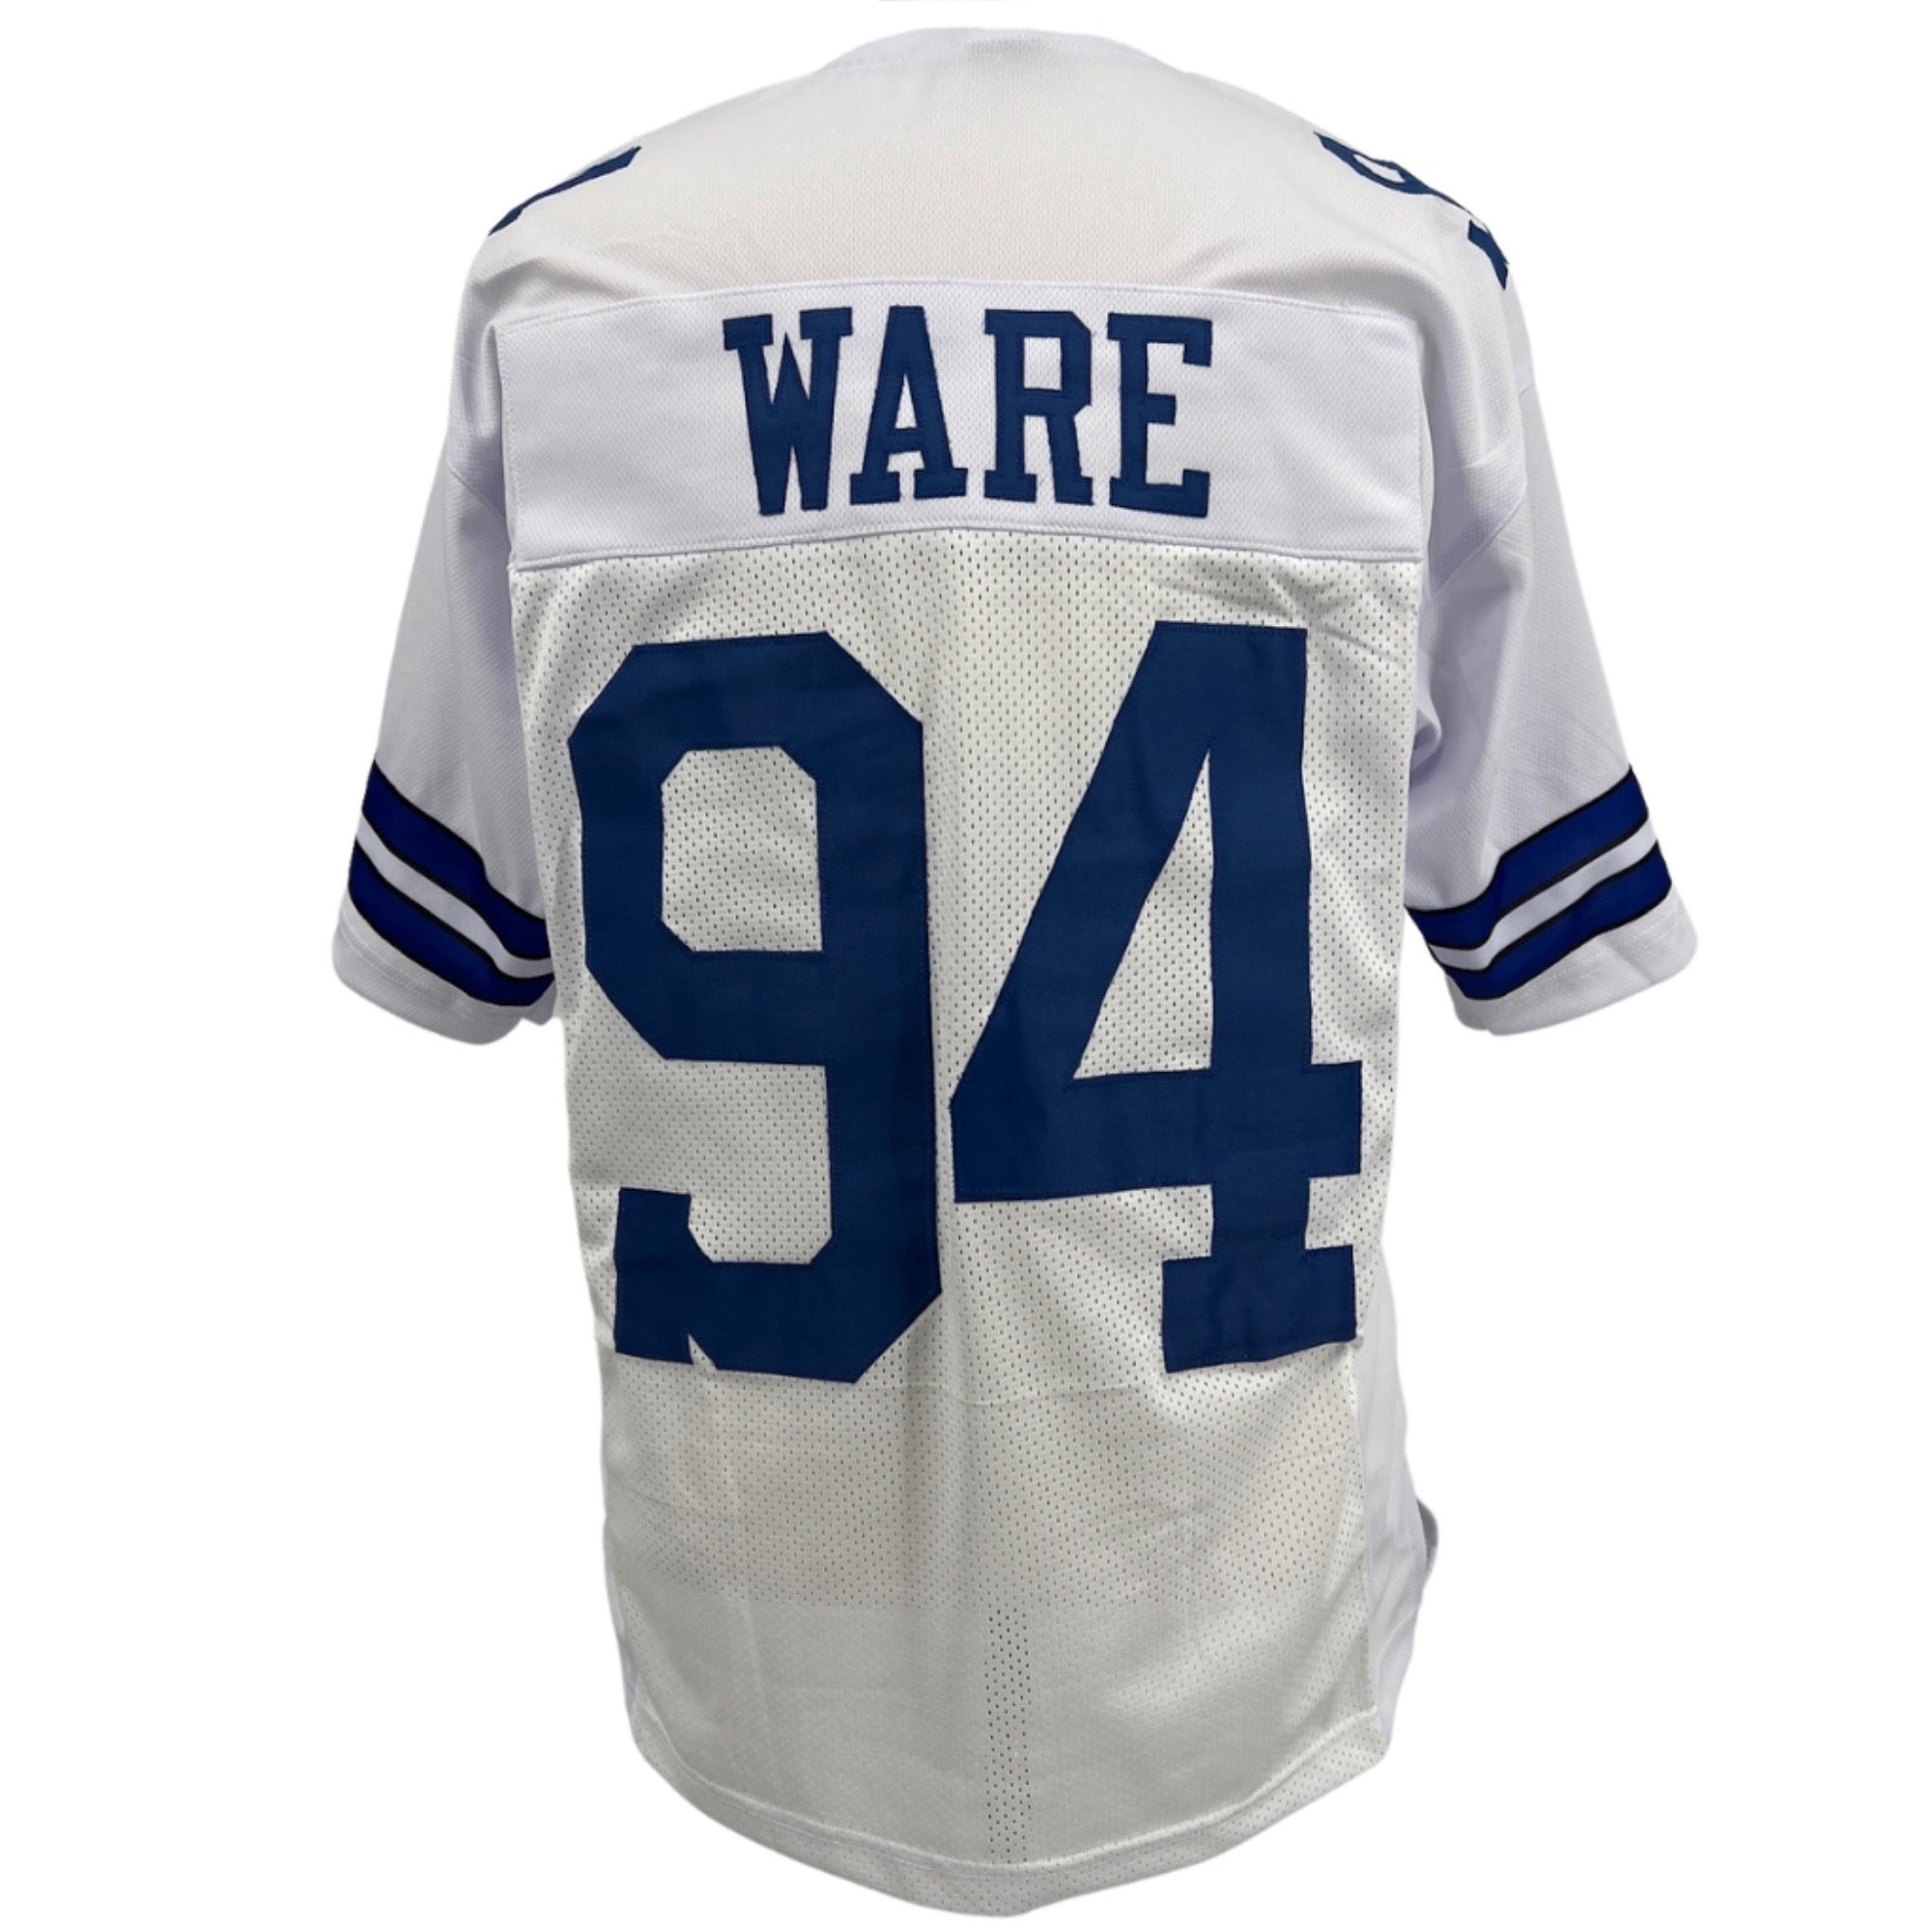 DEMARCUS WARE Dallas Cowboys WHITE Jersey M-5XL Unsigned Custom Sewn Stitched